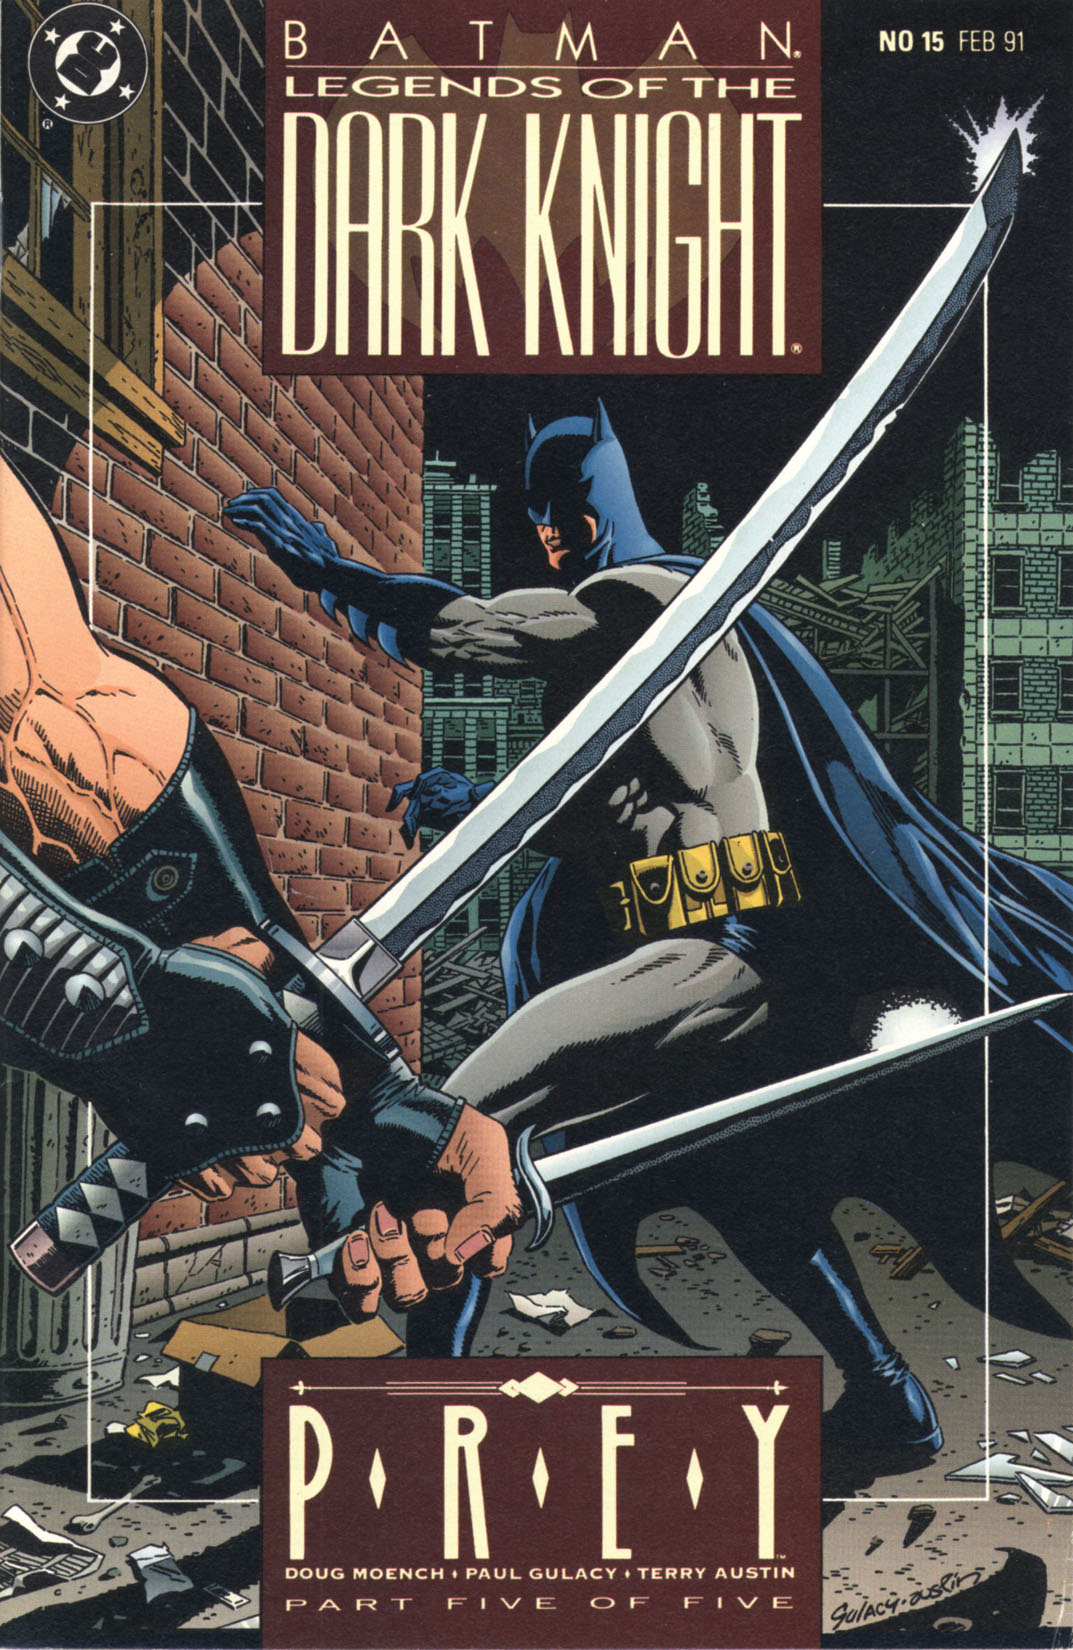 Batman: Legends of the Dark Knight #15 preview images